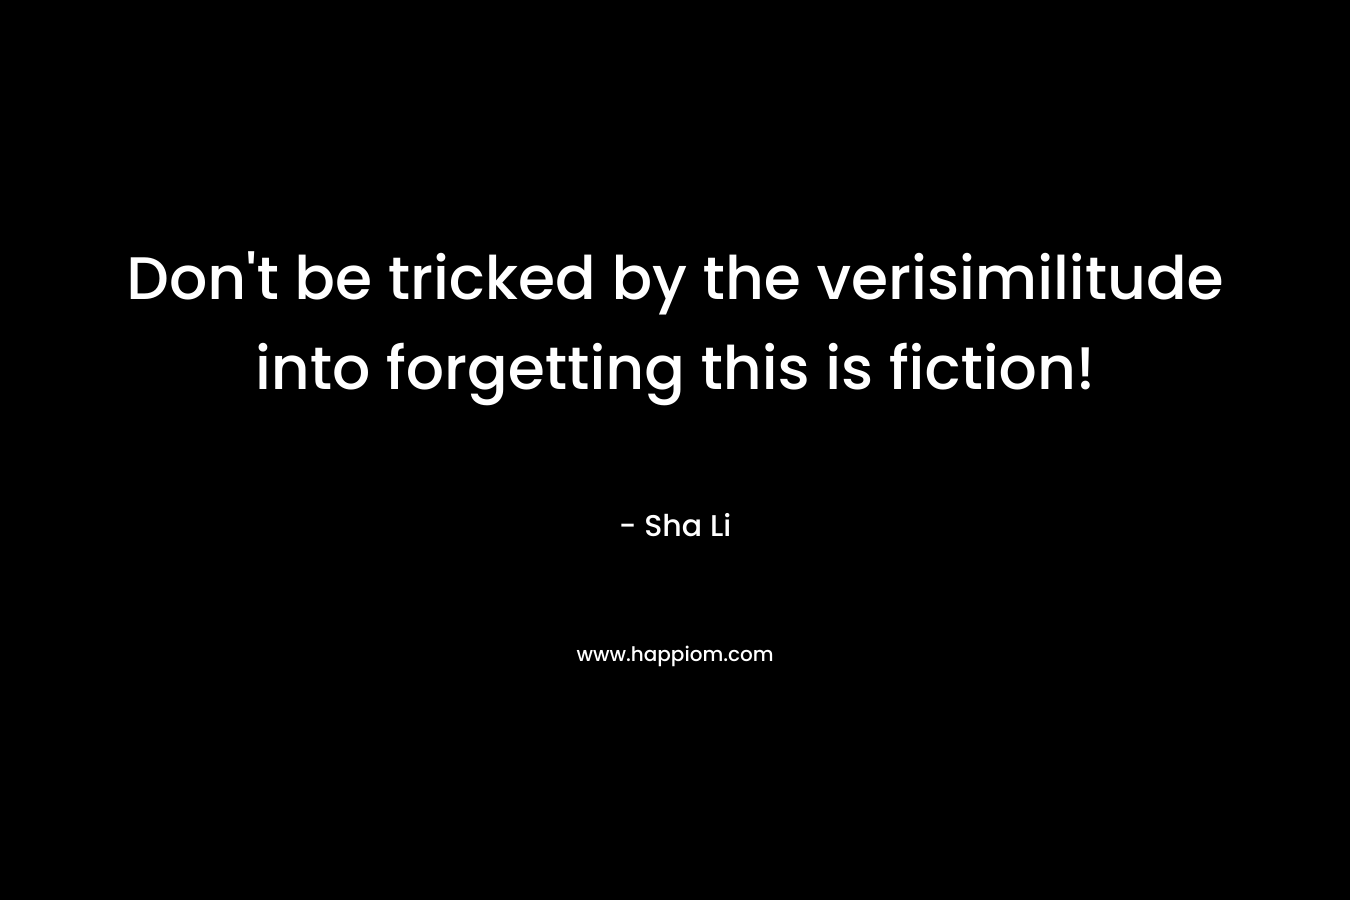 Don’t be tricked by the verisimilitude into forgetting this is fiction! – Sha Li